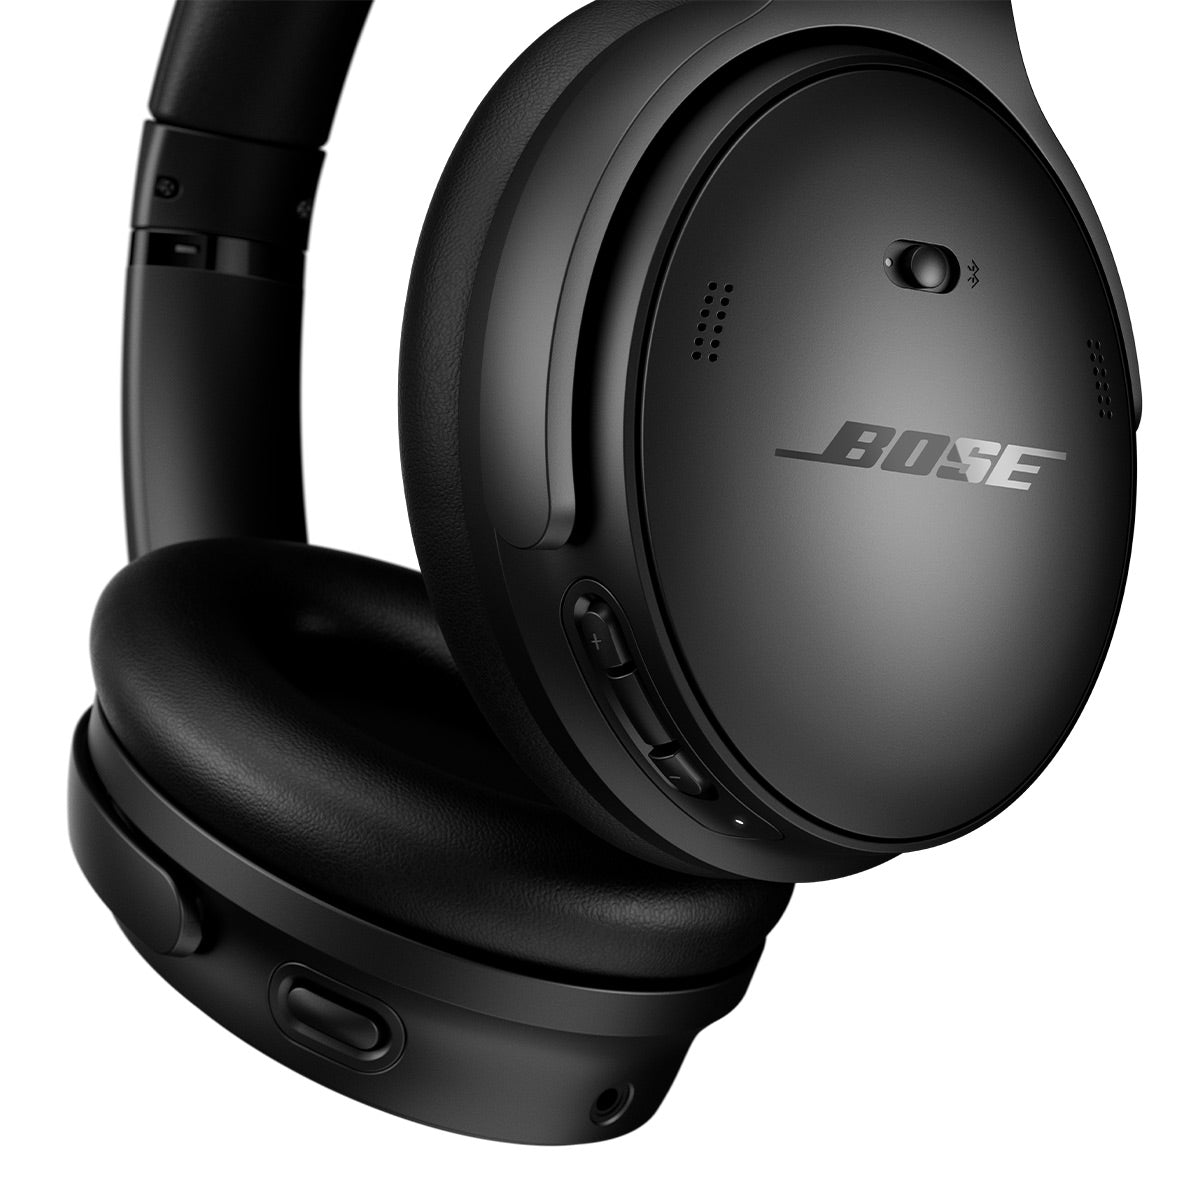 Bose QuietComfort Noise Cancelling Over-Ear Wireless Bluetooth Headphones  with Mic/Remote, Triple Black